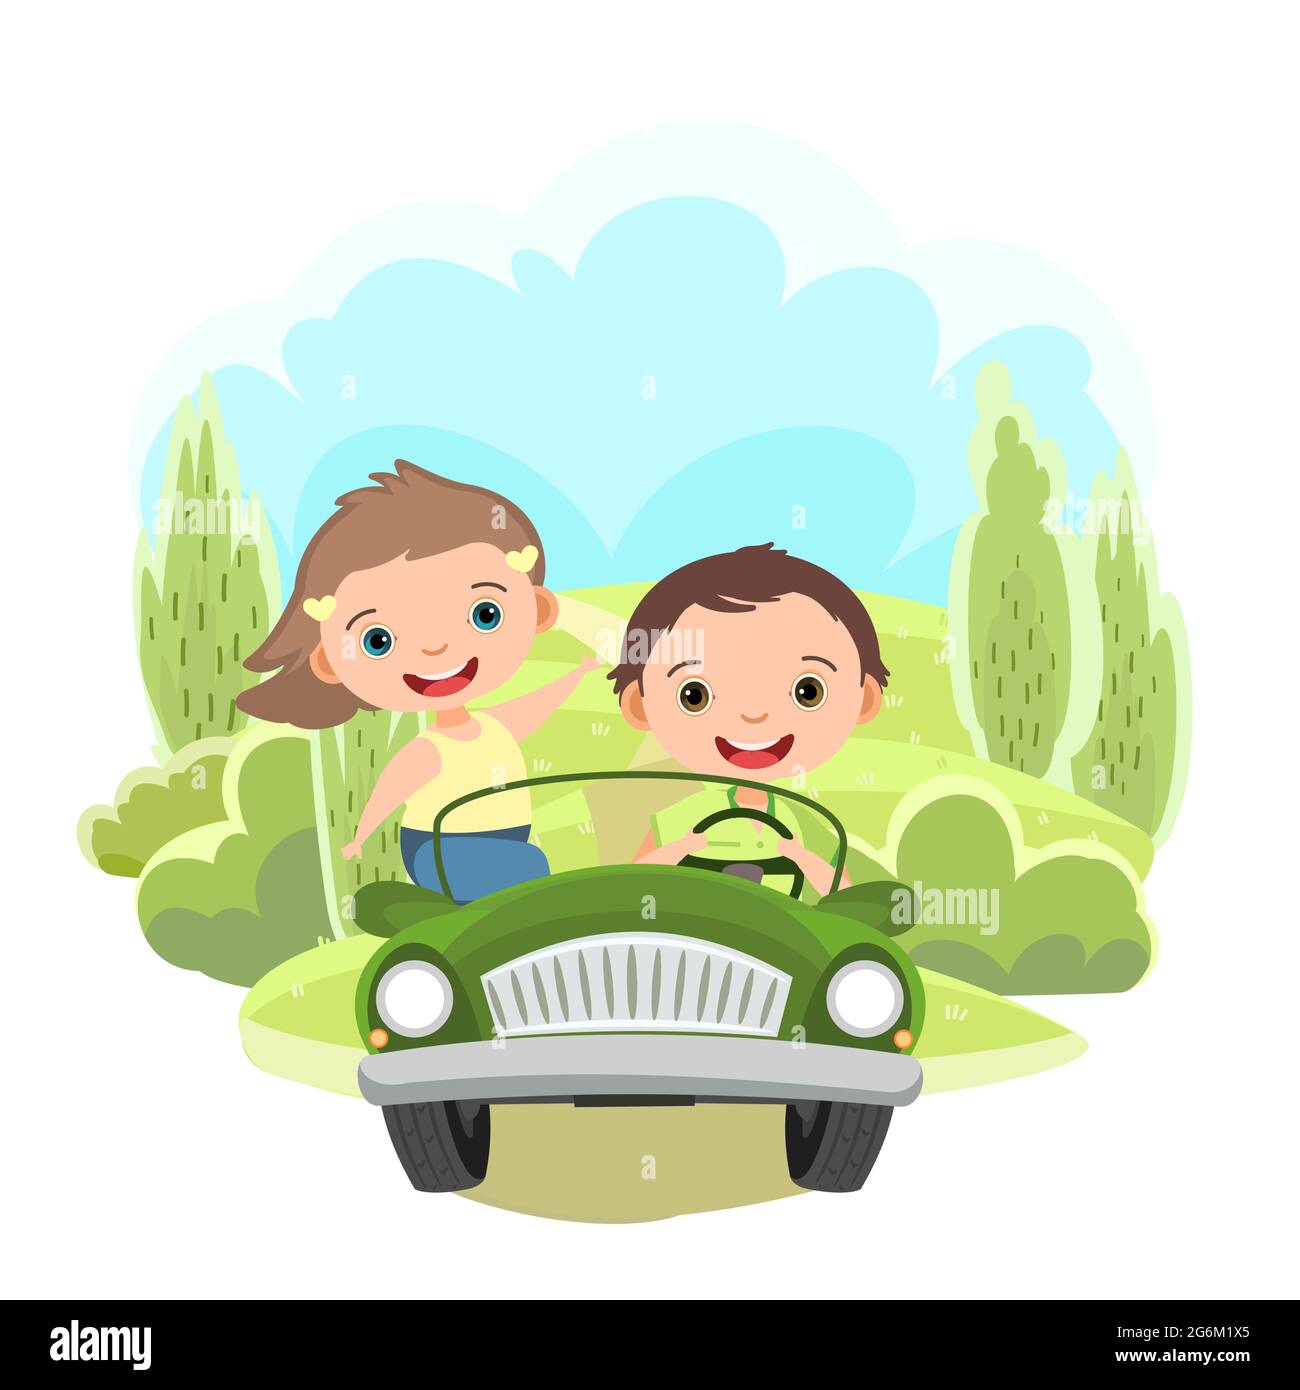 Childrens trip in a small car. Kid drives a pedal or electric toy automobile. Cartoon illustration. Isolated. Summer rural green landscape. Vector Stock Vector